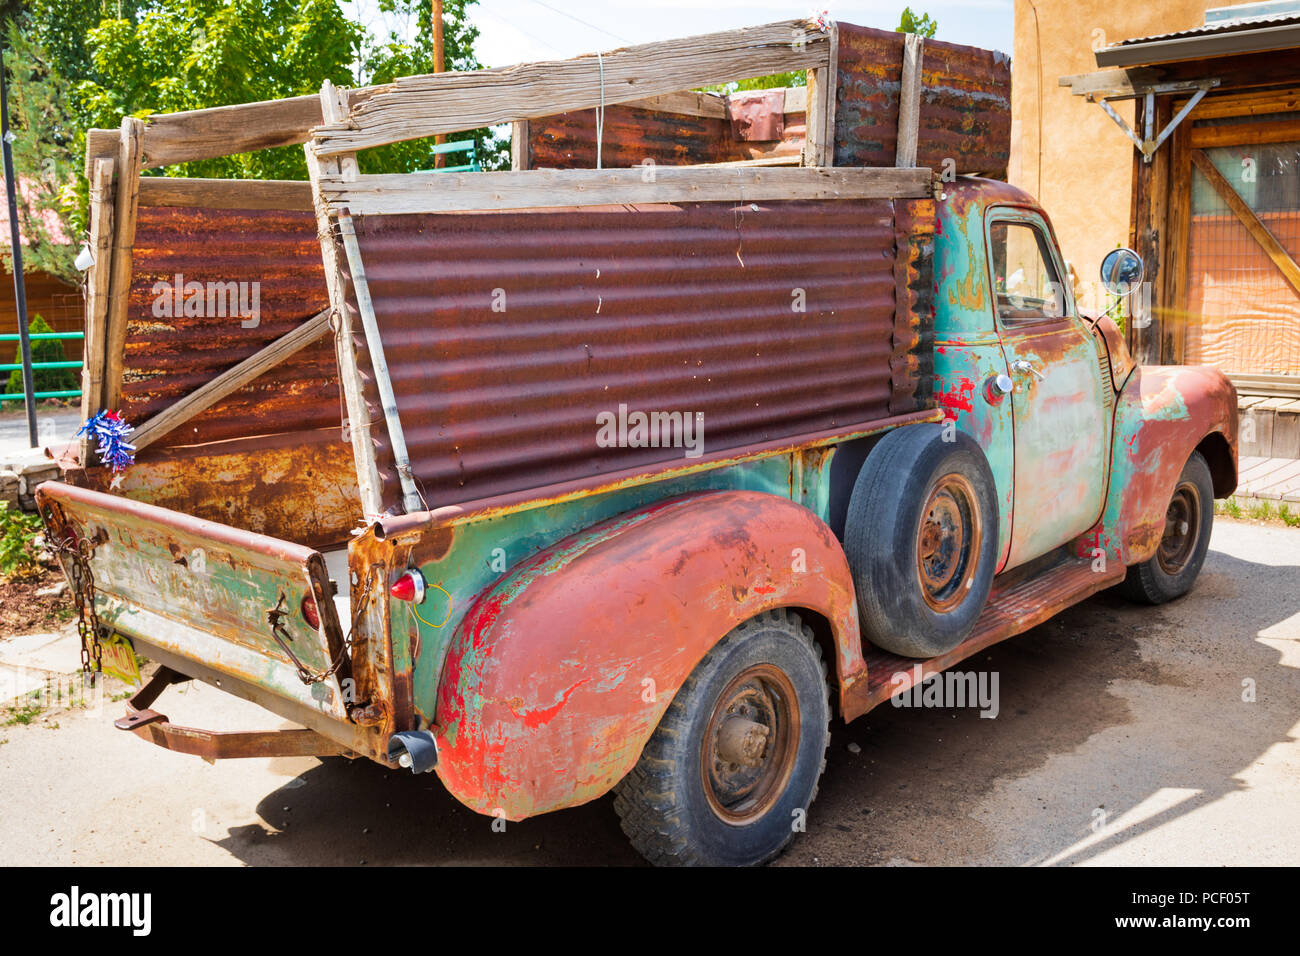 ARROYO SECO, NM, USA-12 JULY 18:  This colorful 1950ish Chevrolet pickup truck sets in a parking lot in the small village, with current license plates Stock Photo